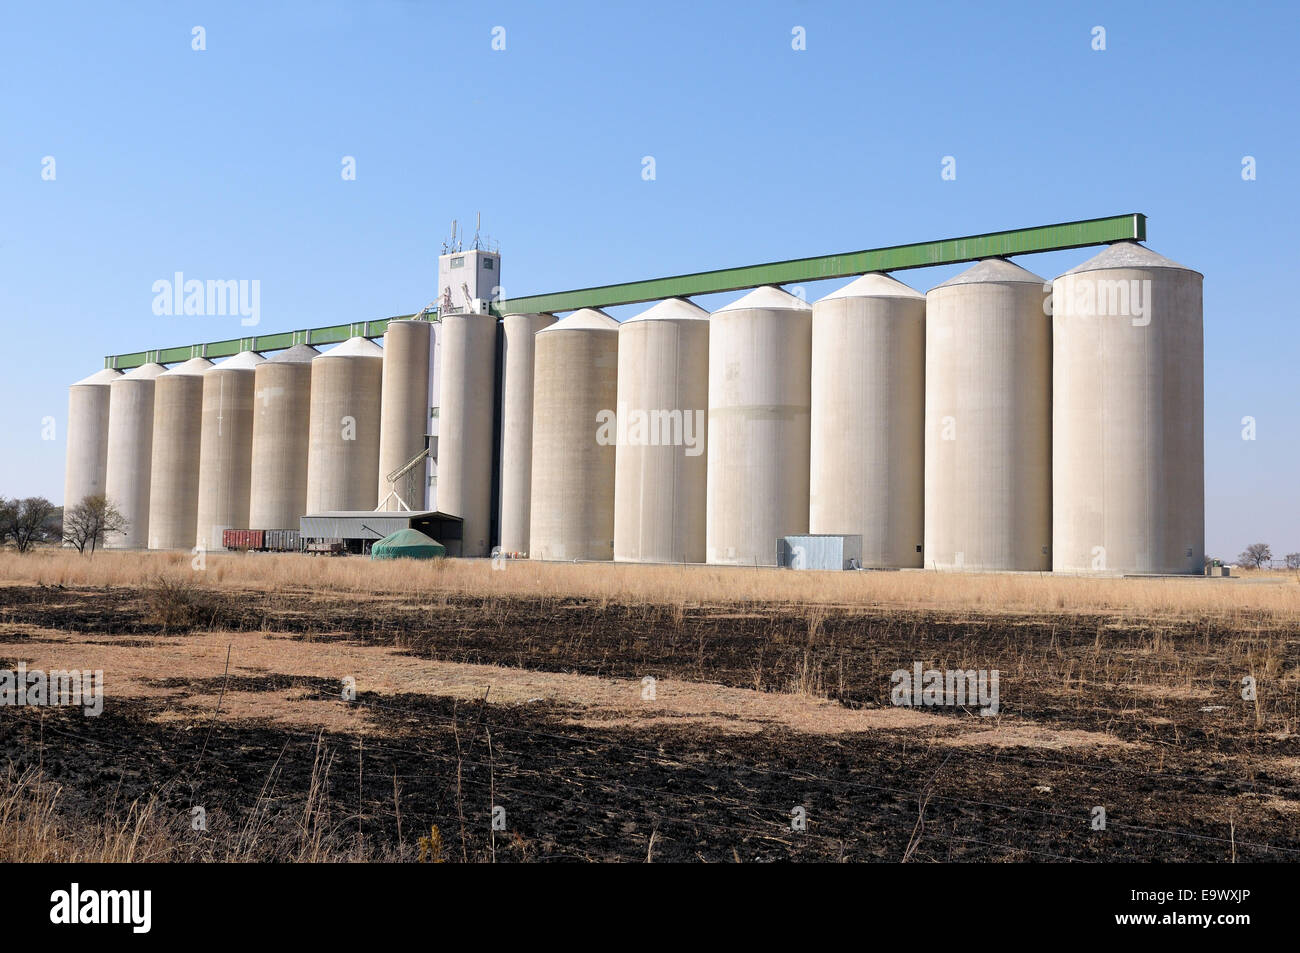 Grain silo at Koppies in the Free State Province of South Africa Stock Photo